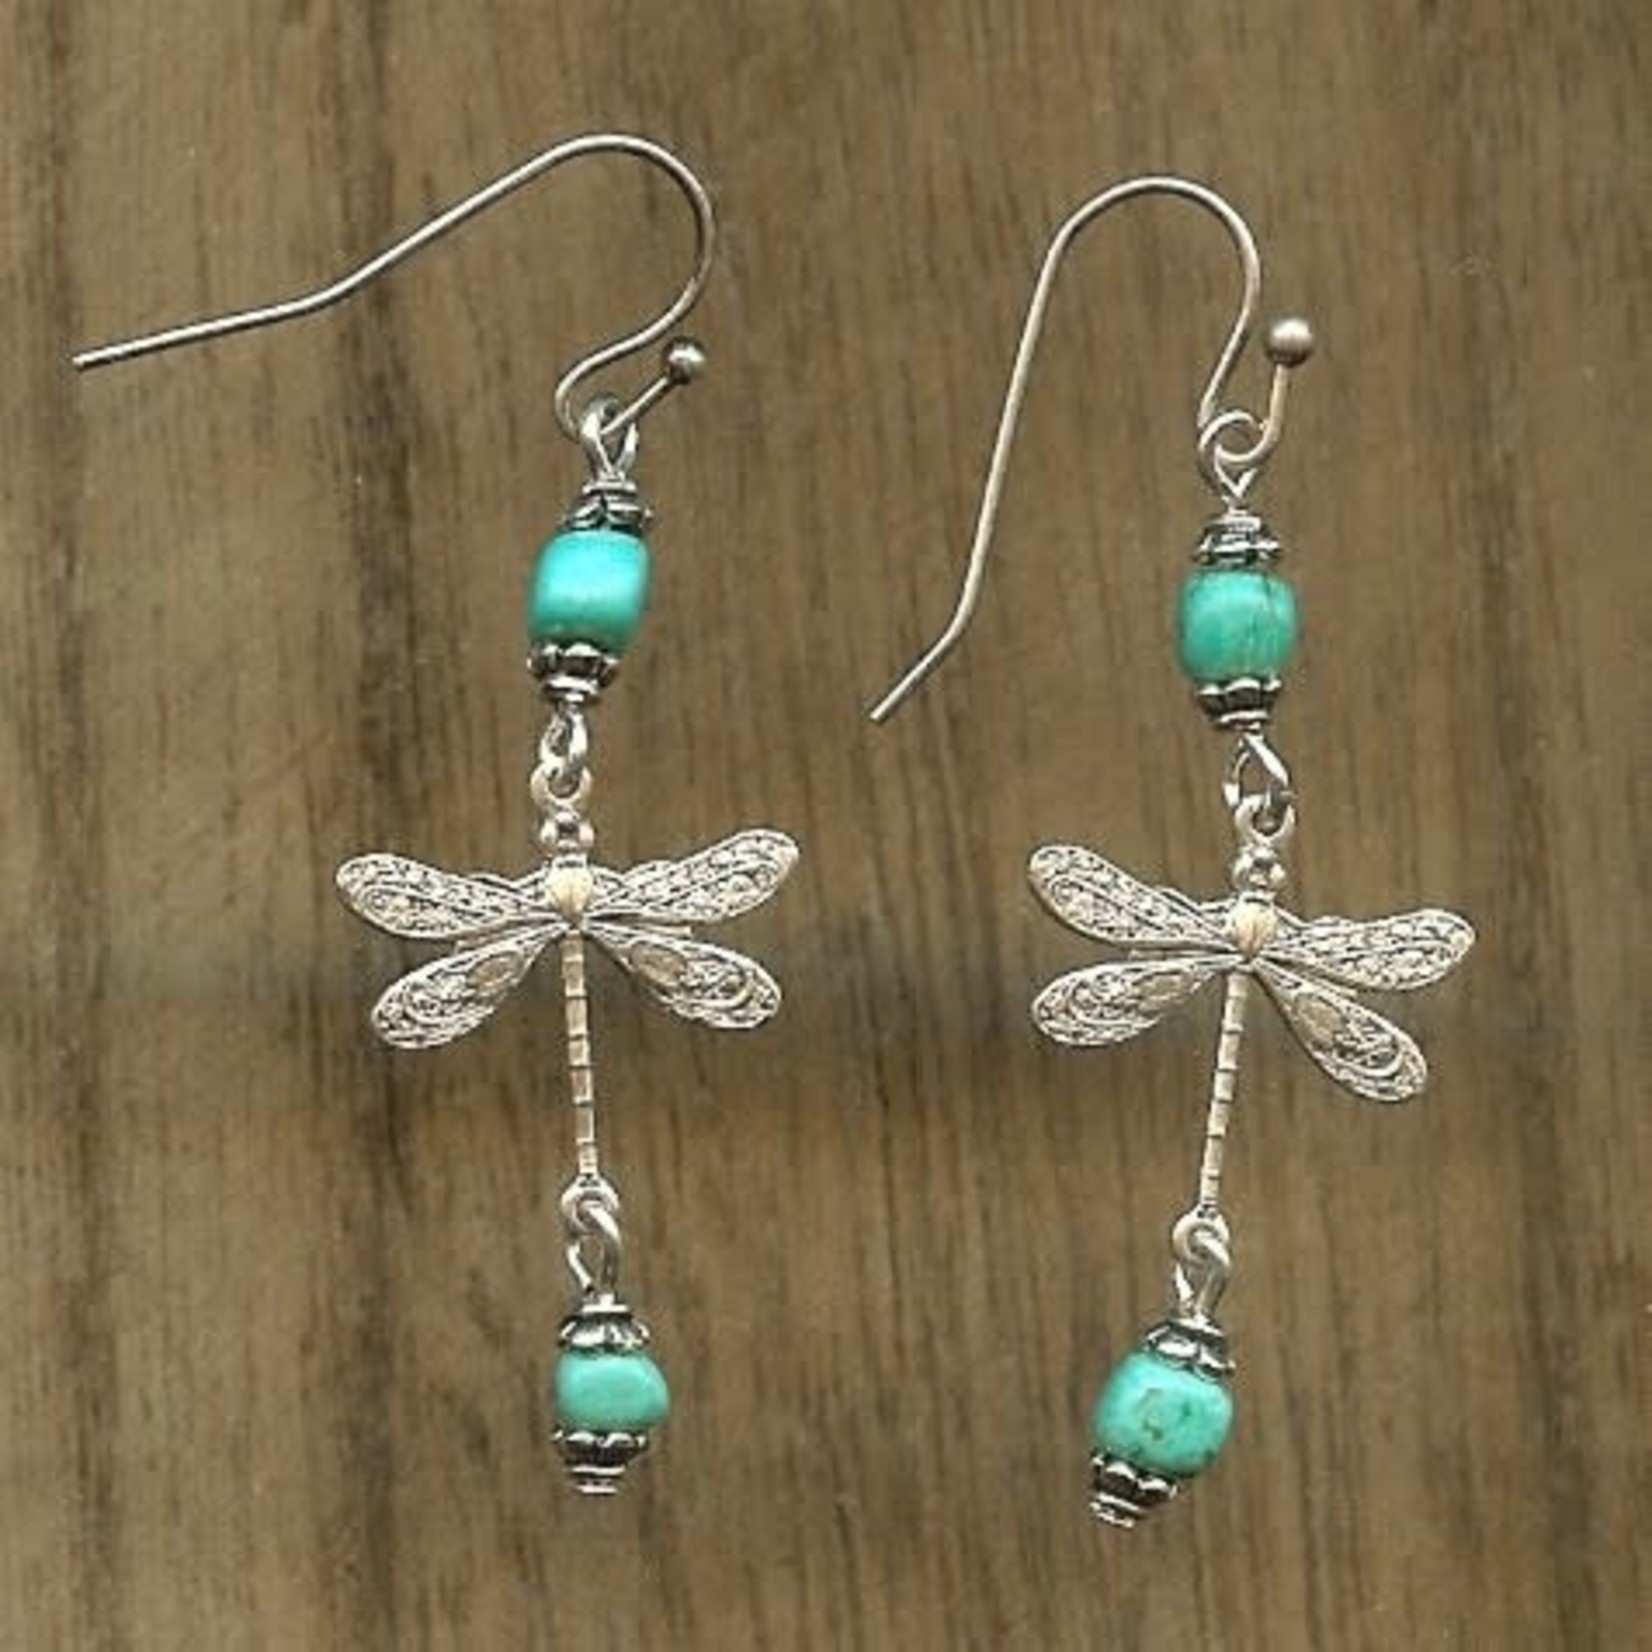 Bead Inspirations Dragonfly Turquoise Earring Kit